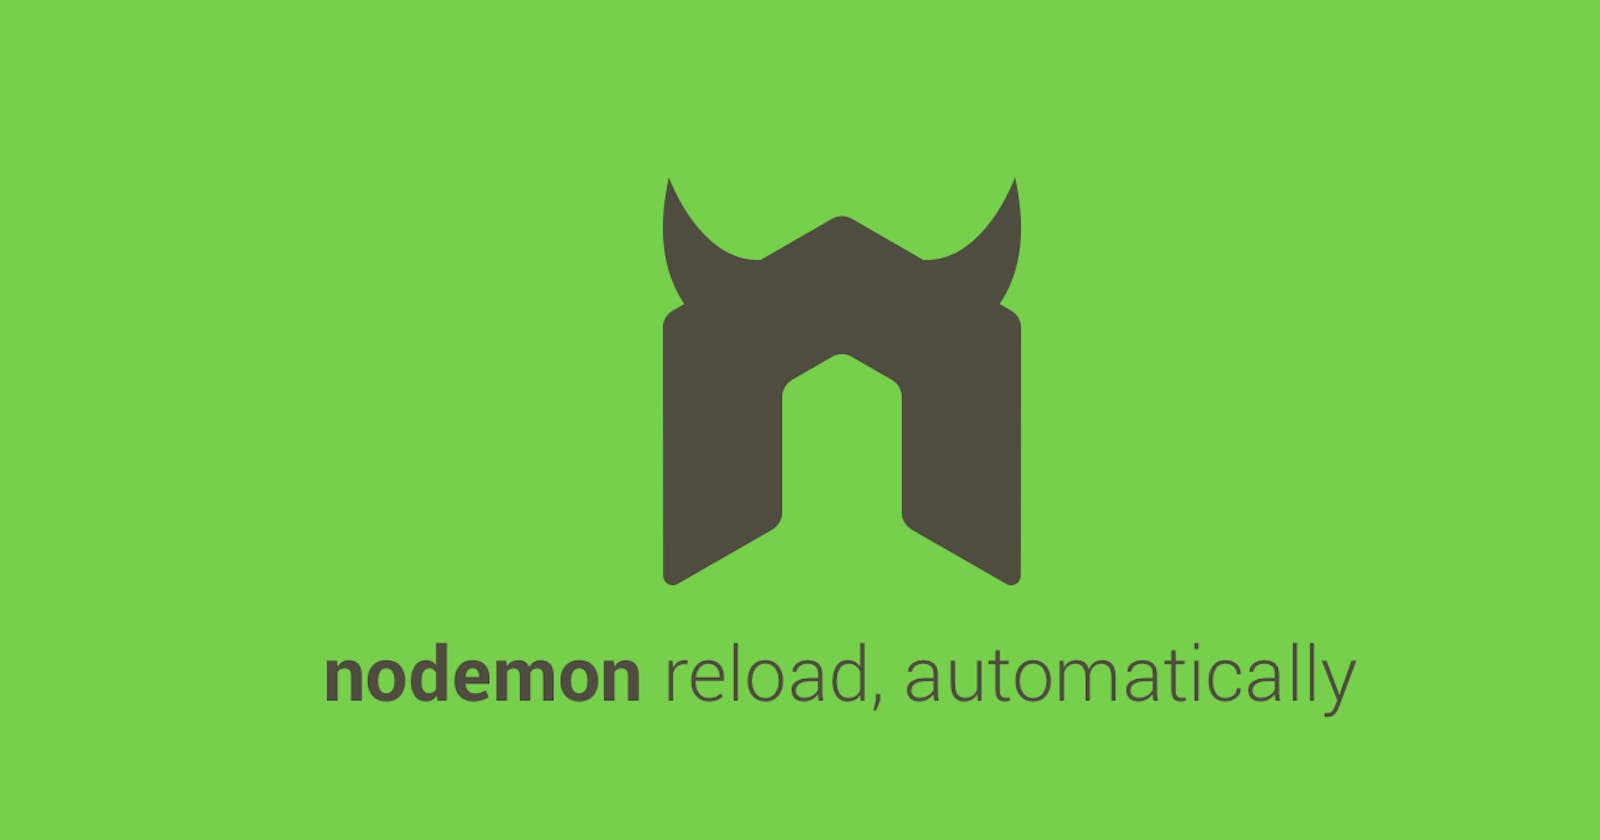 If the term nodemon is not recognized after installing it globally on Windows